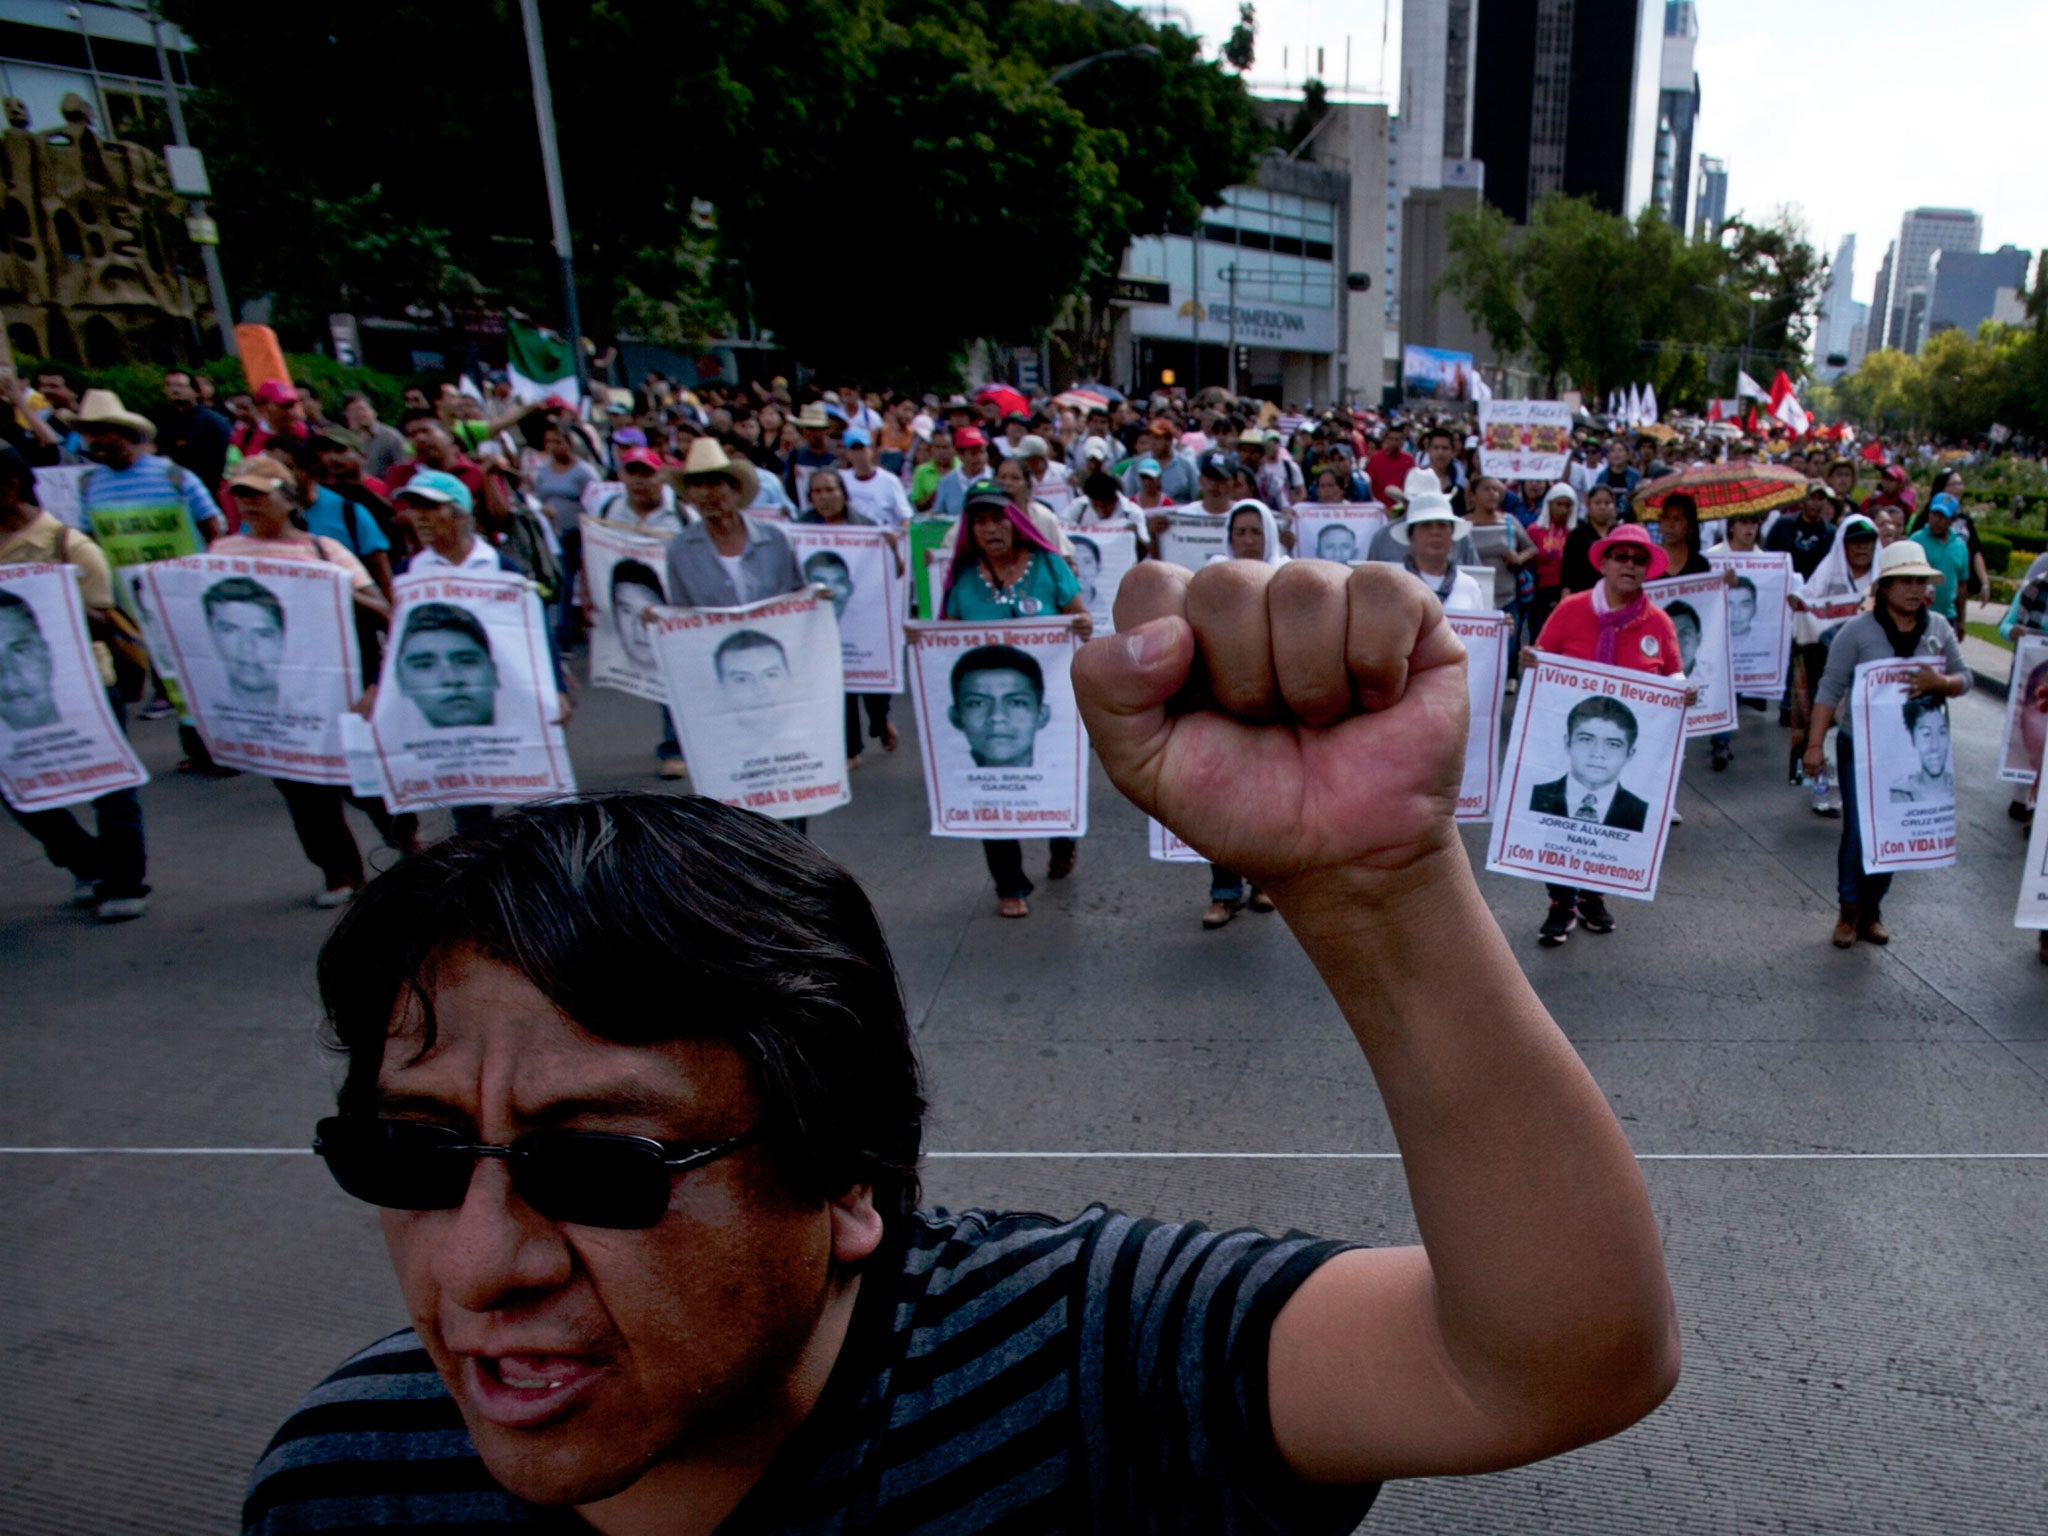 Relatives of the 43 missing students from the Isidro Burgos rural teachers college march holding pictures of their missing loved ones during a protest in Mexico City, Sunday, July 26, 2015